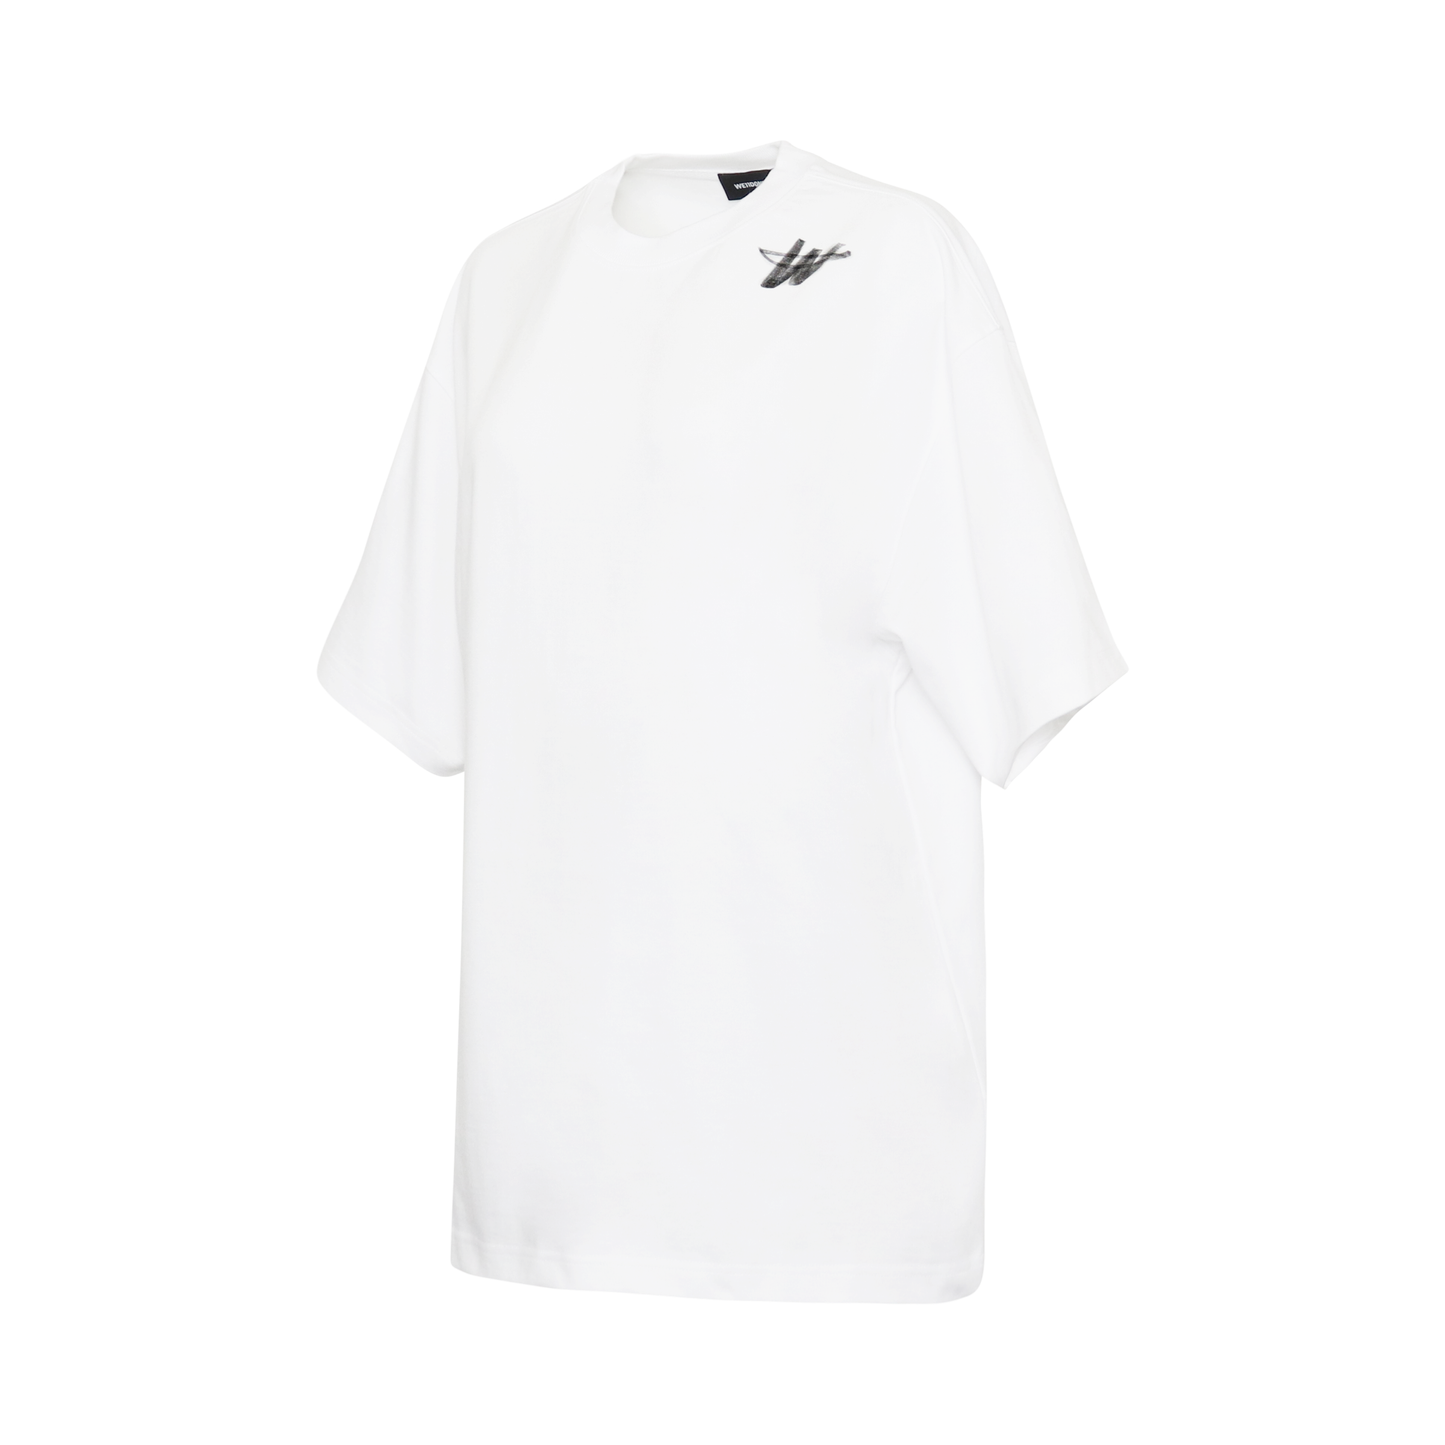 Classic WD Logo T-Shirt in White